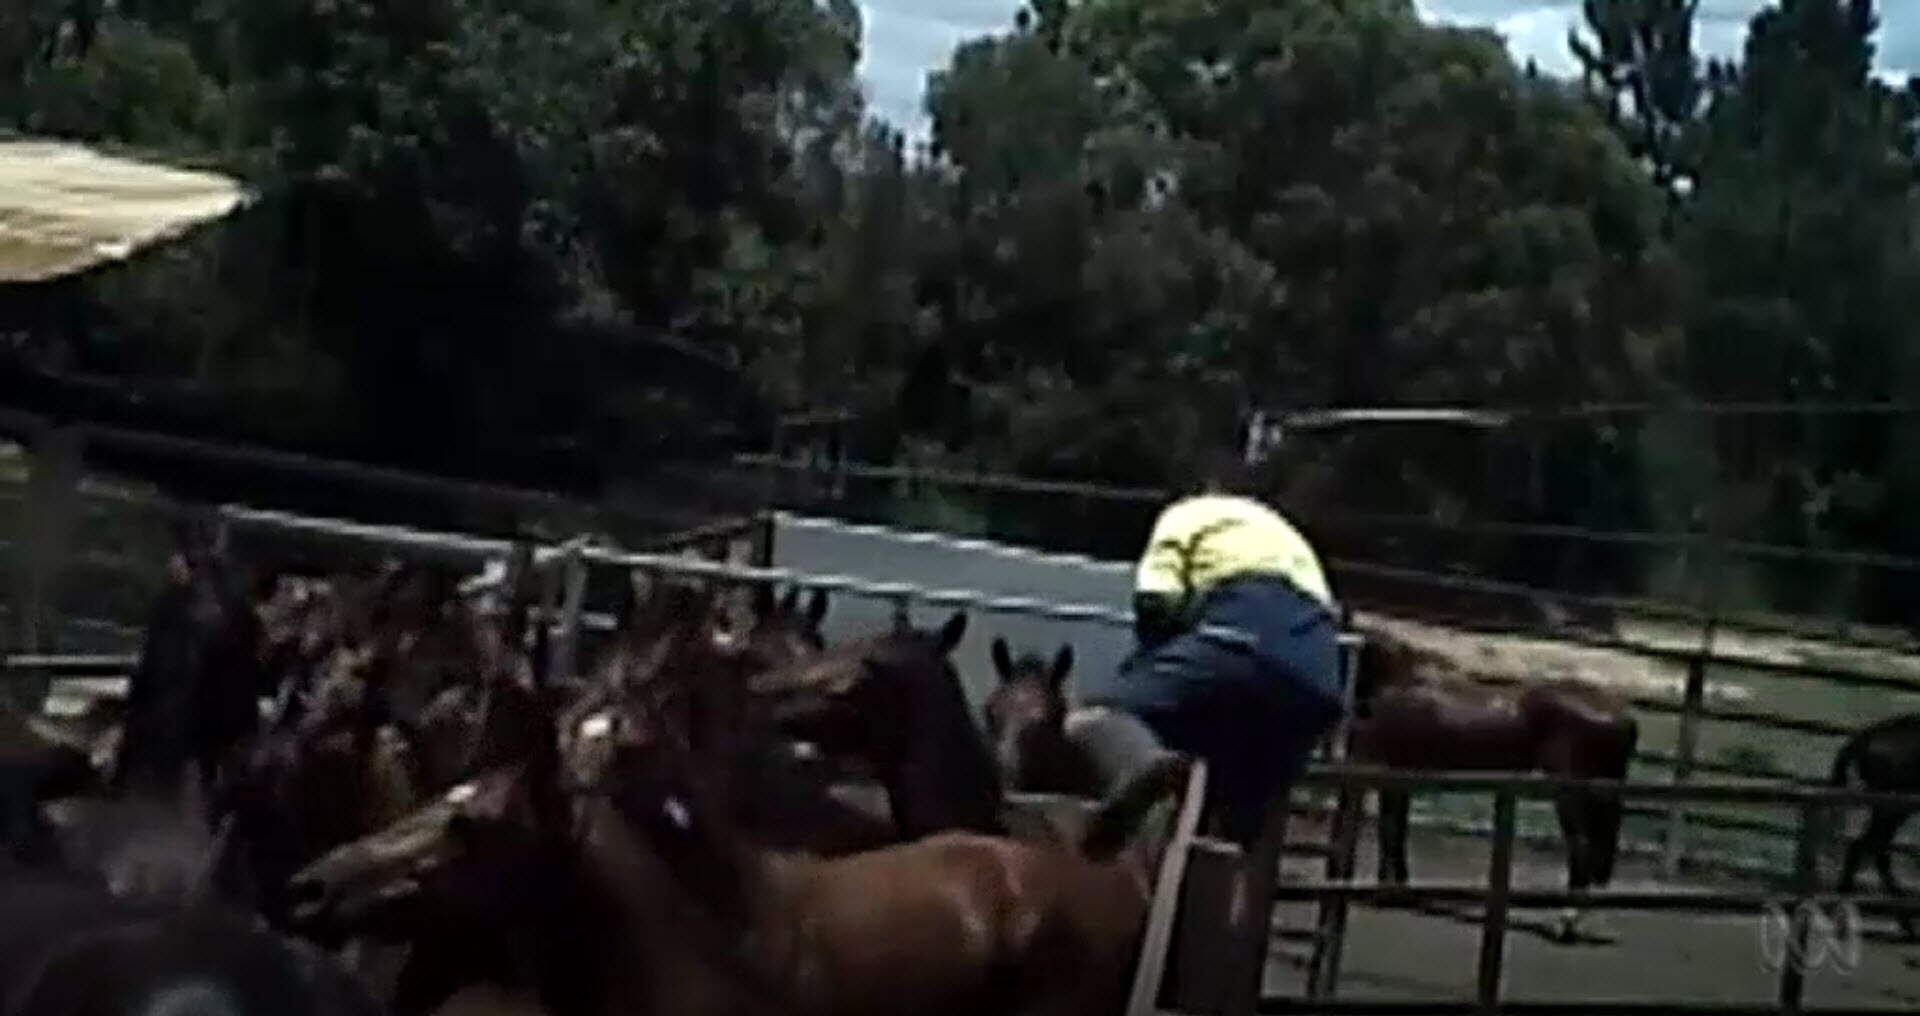 Video obtained by the ABC showed abbatoir workers tormenting horses before they were killed.